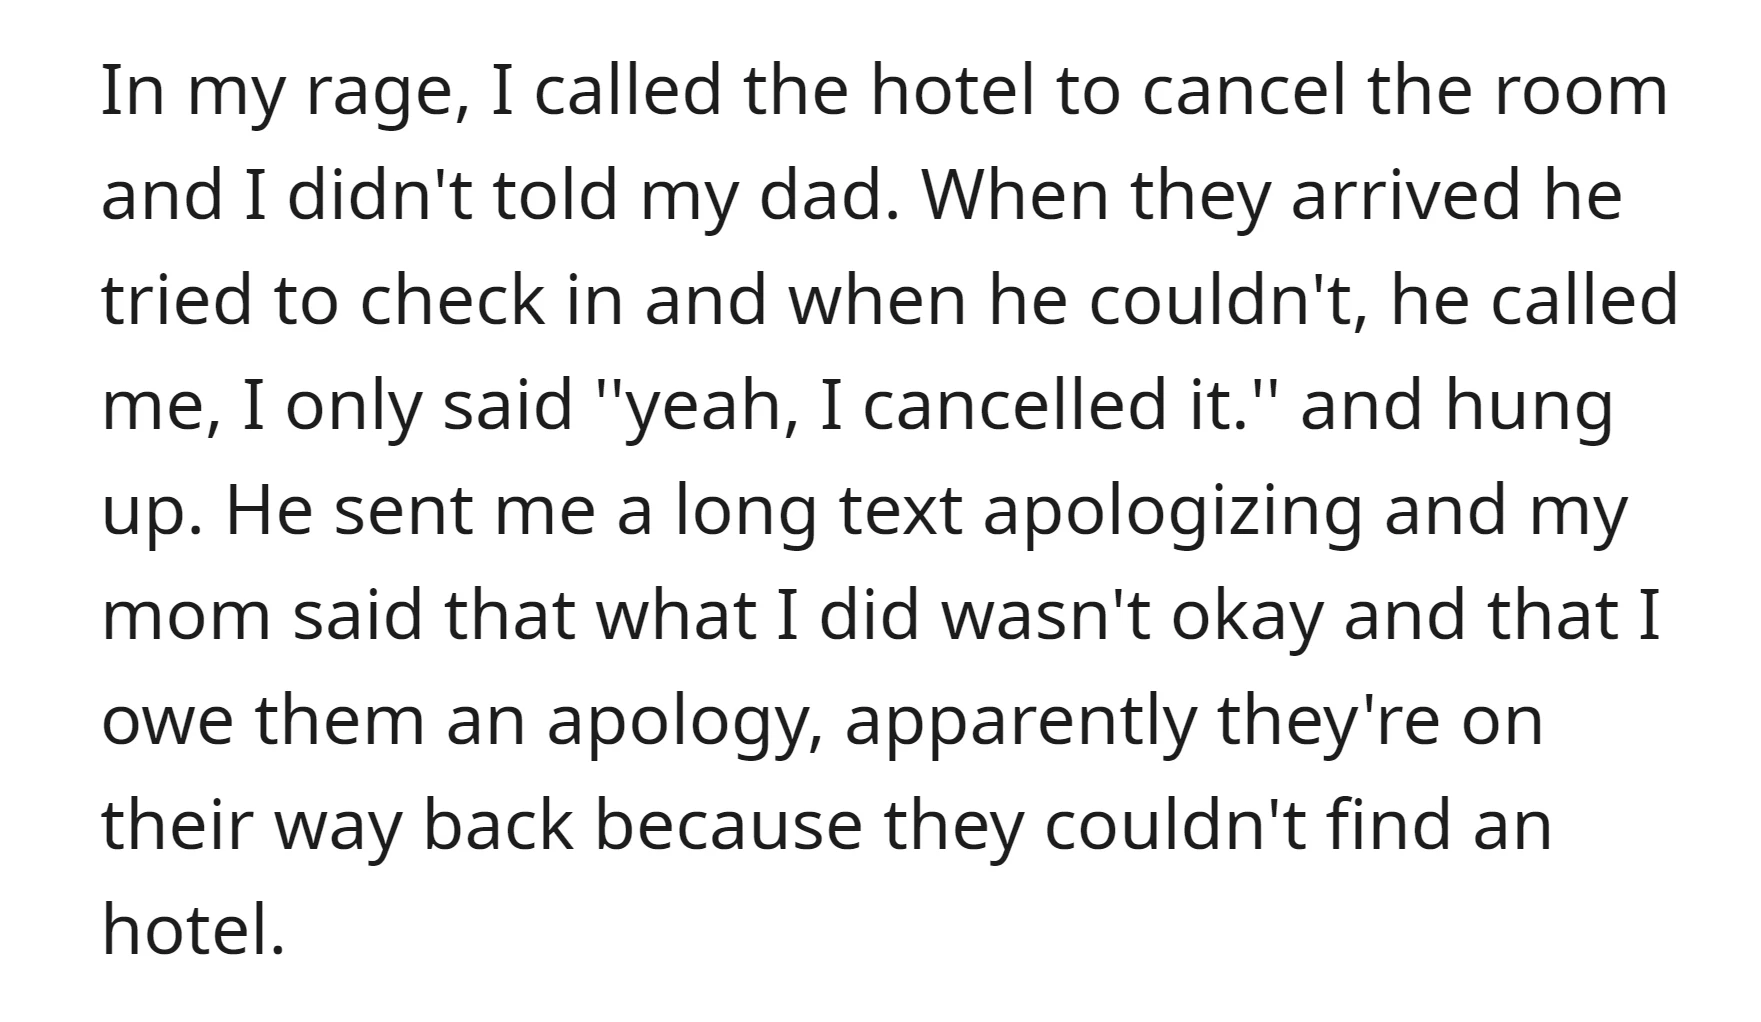 OP canceled the hotel reservation for her dad's beach celebration with her step-sister